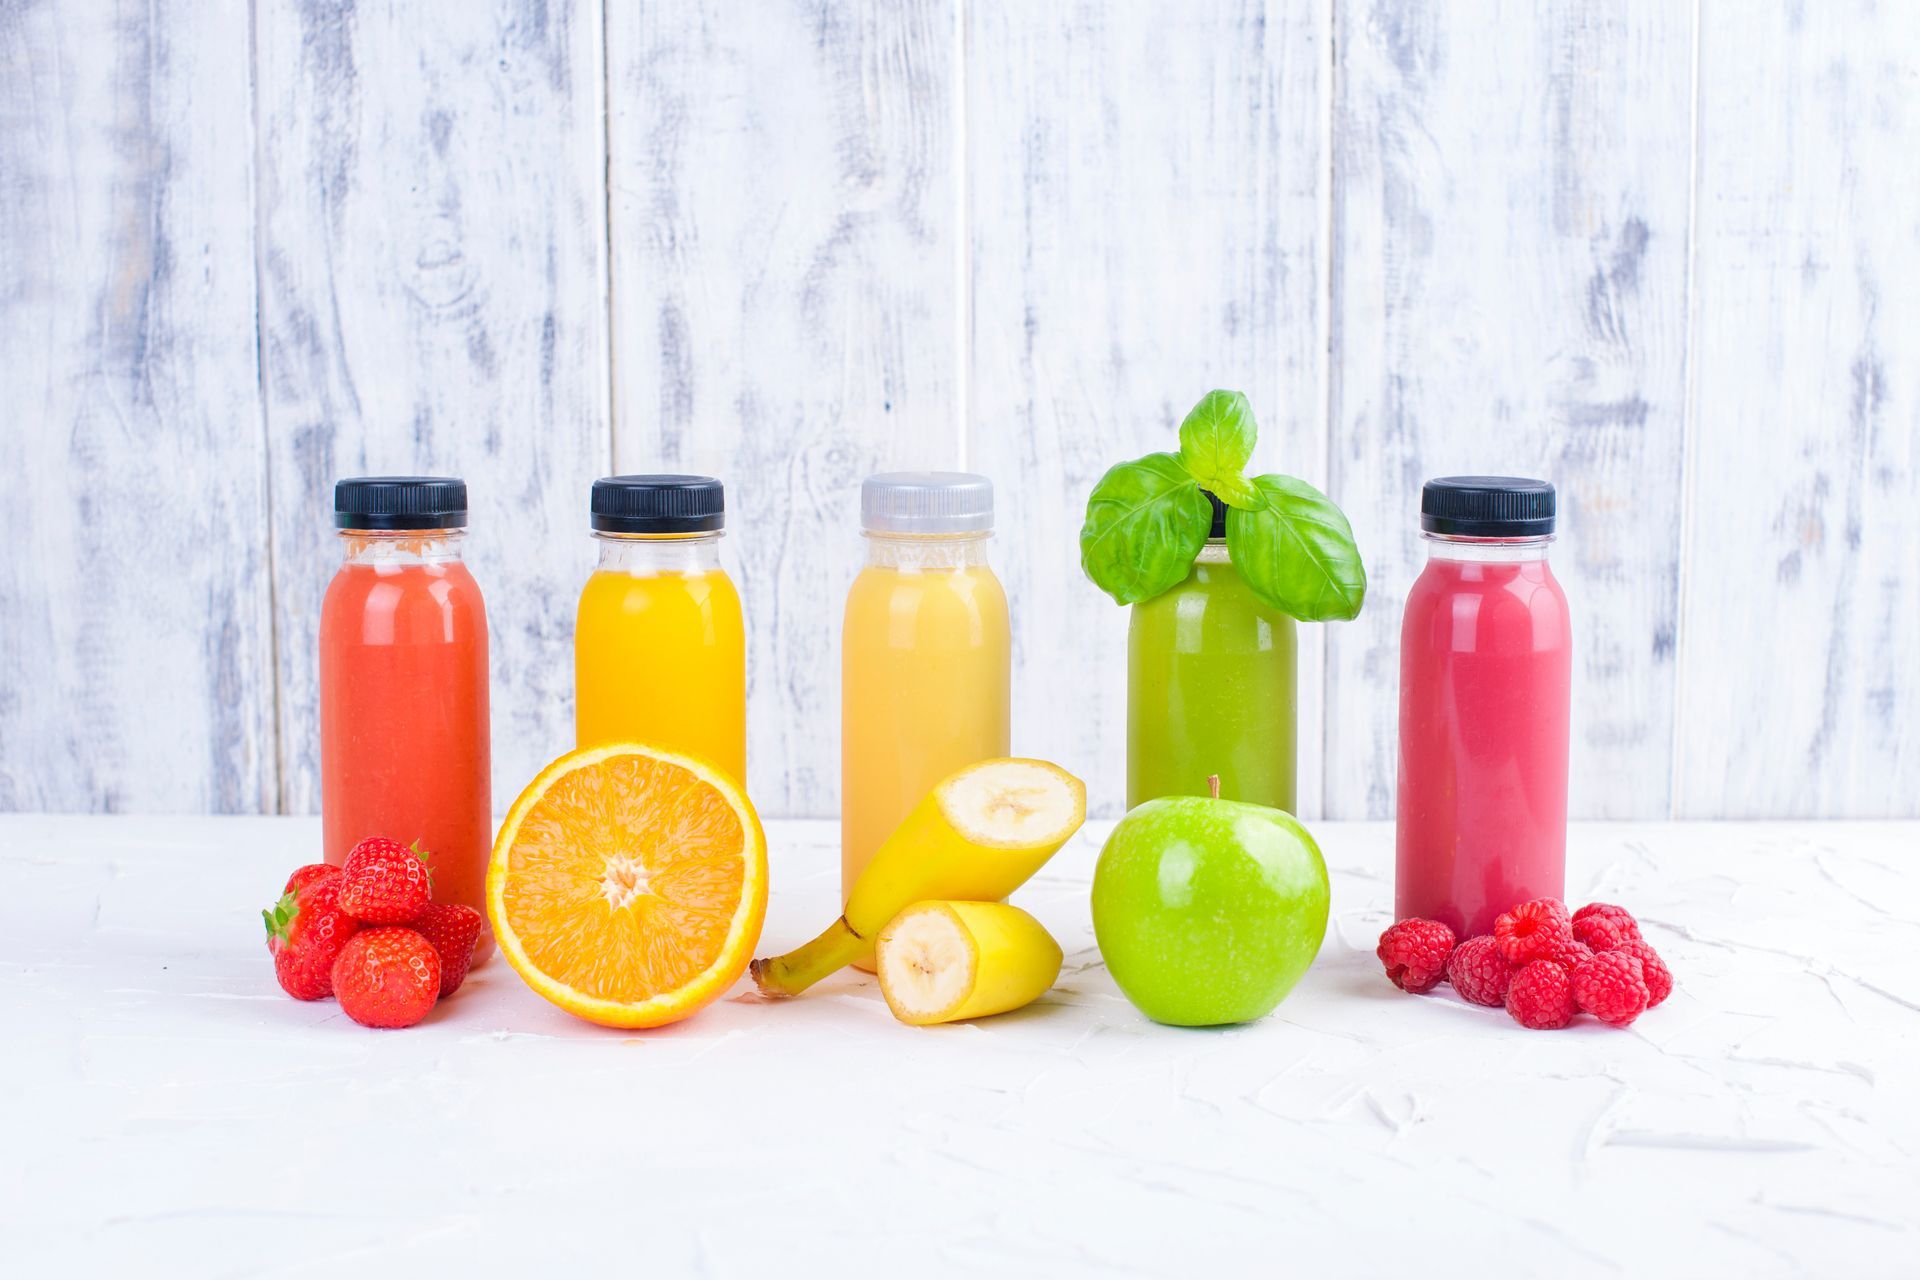 Variety of cold-pressed juice flavors--strawberry, orange, banana, apple, and raspberry--in PET plastic bottles.